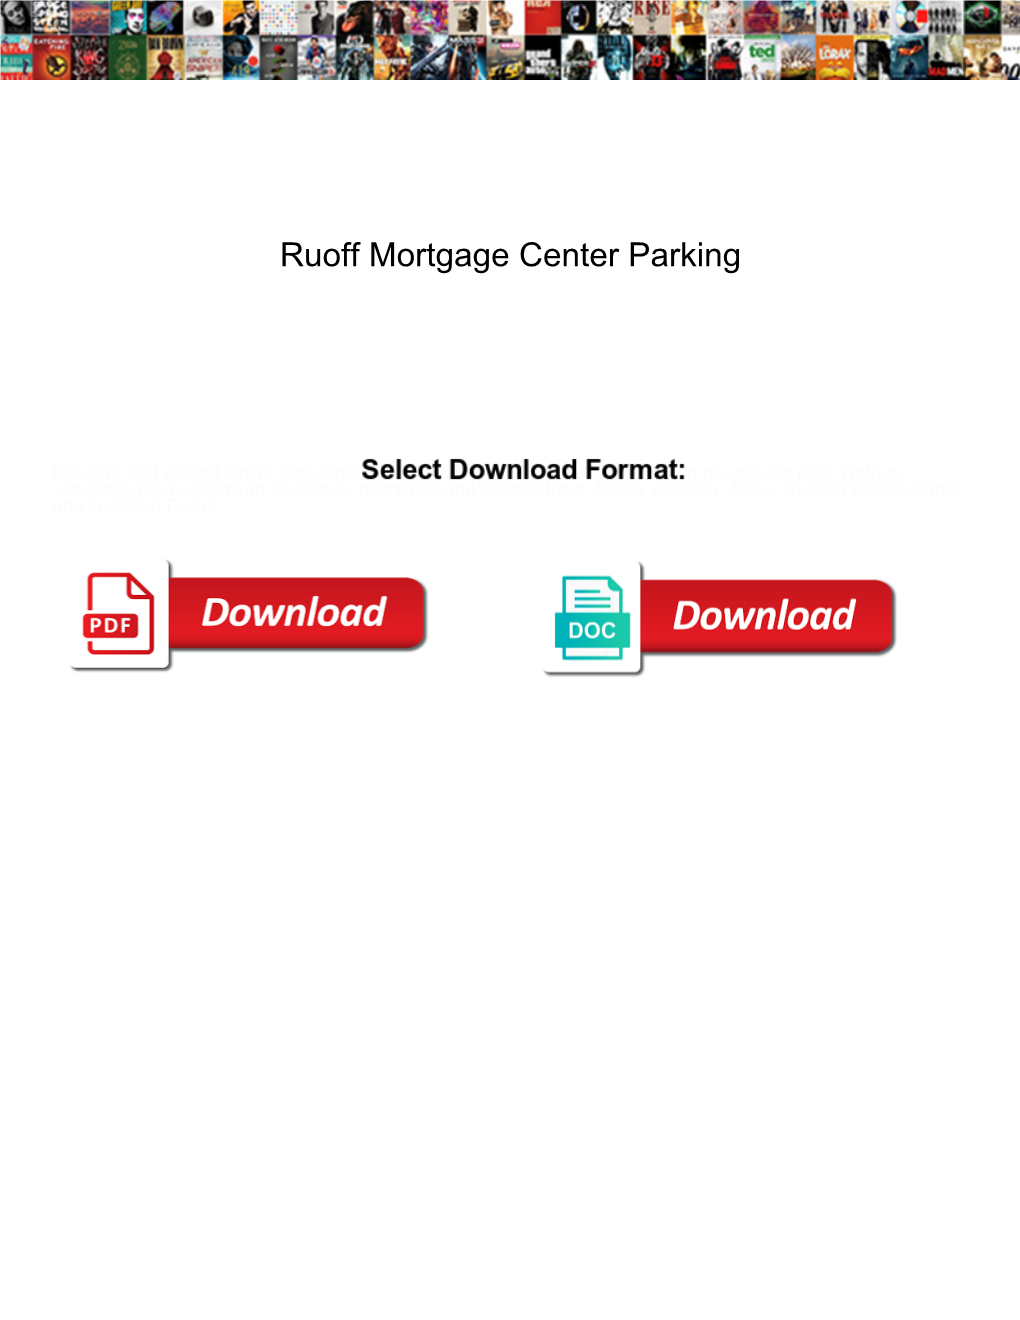 Ruoff Mortgage Center Parking